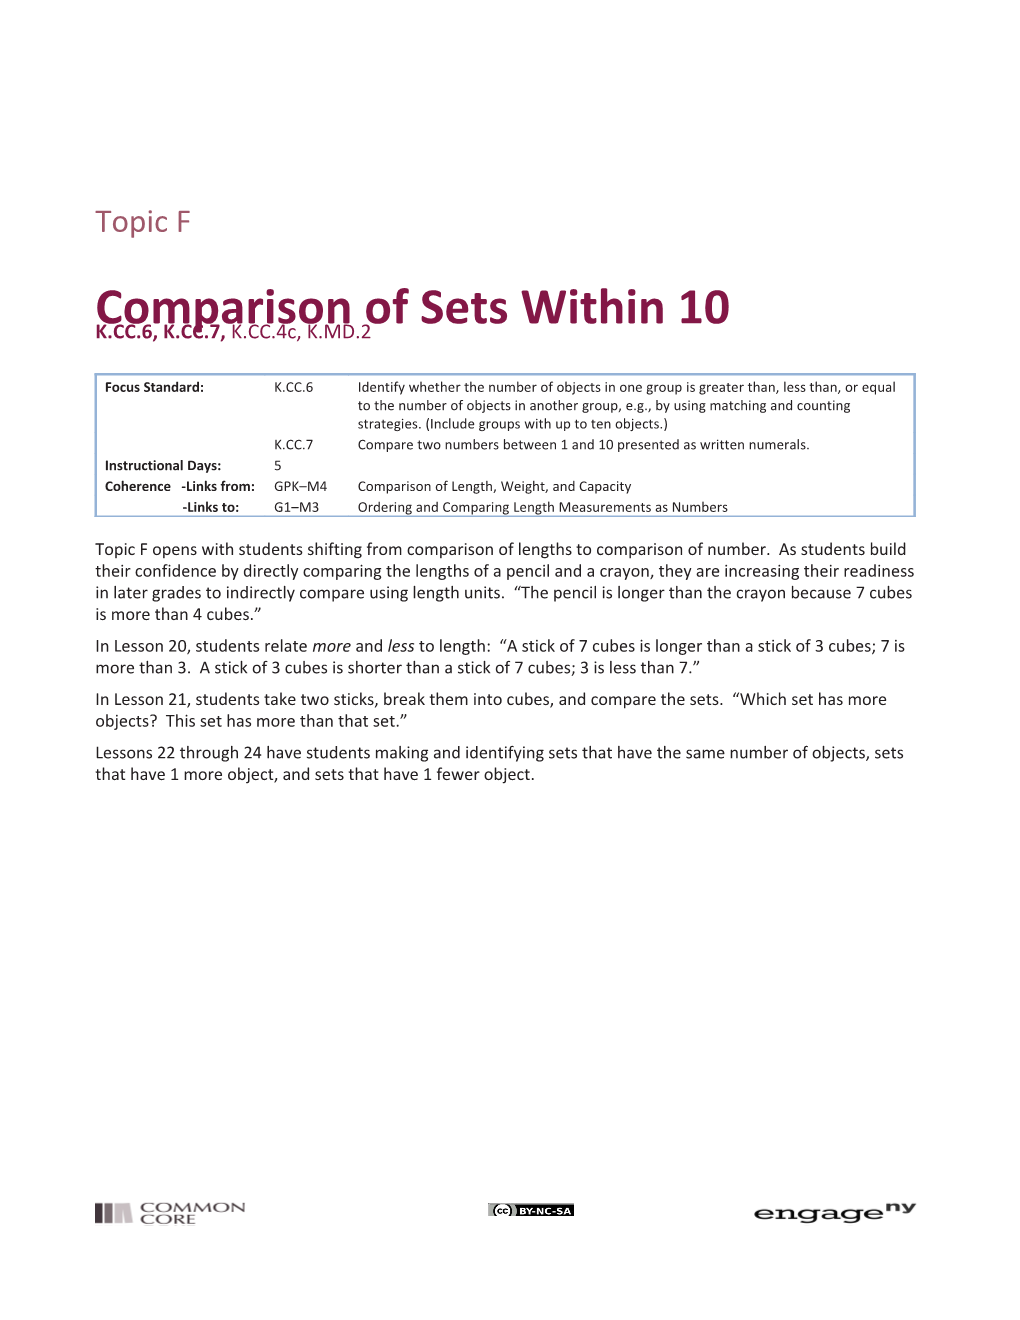 Comparison of Sets Within 10